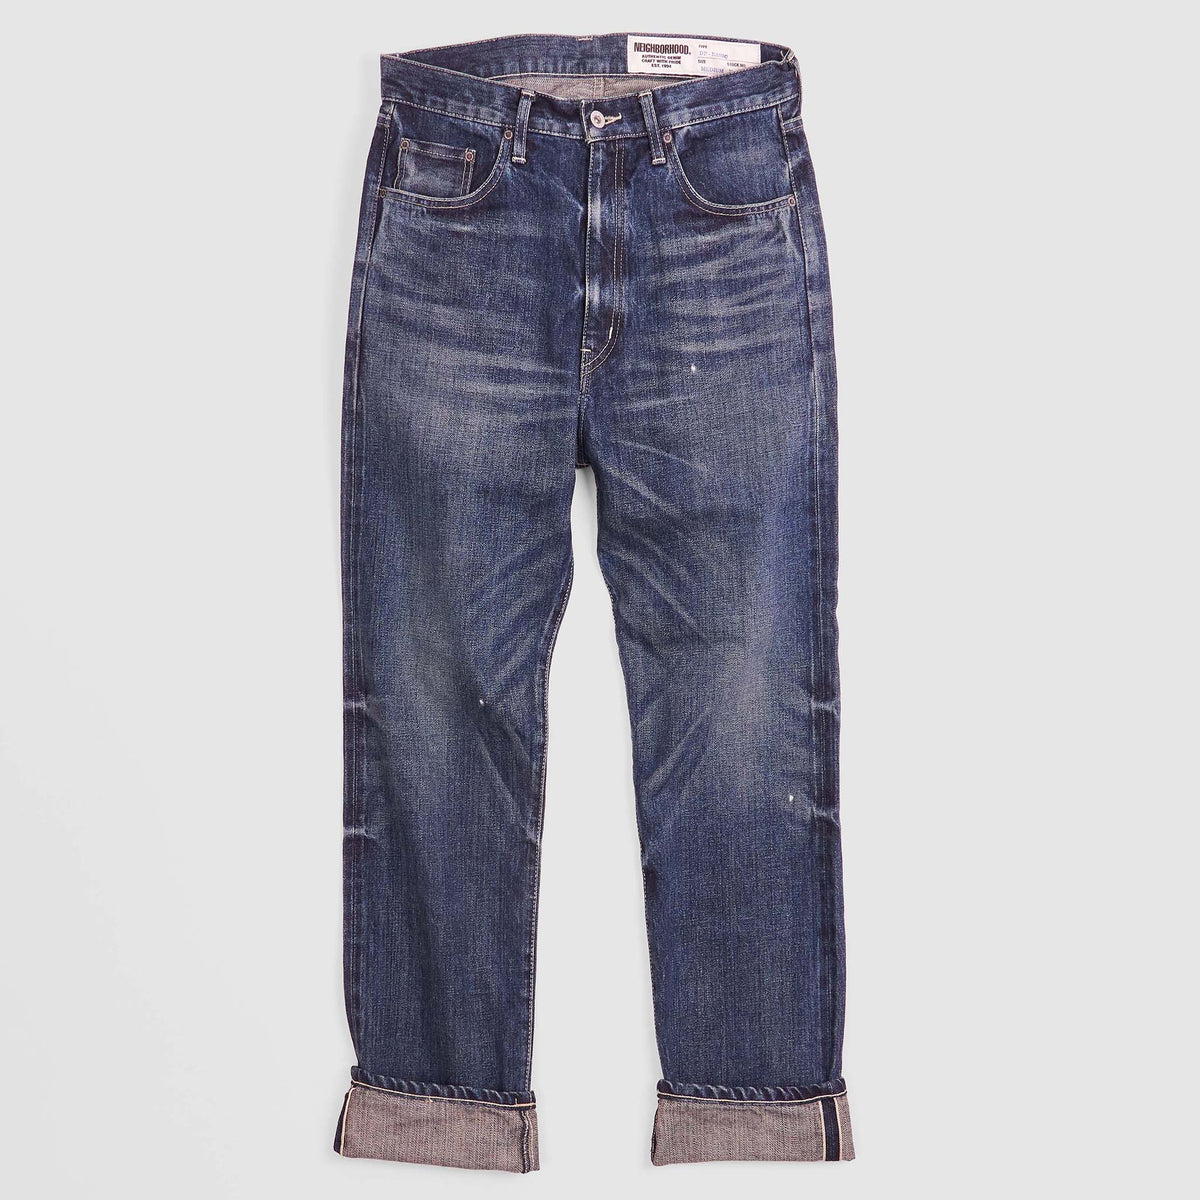 Neighborhood Relaxed Fit Selvage Denim Jeans (Washed)